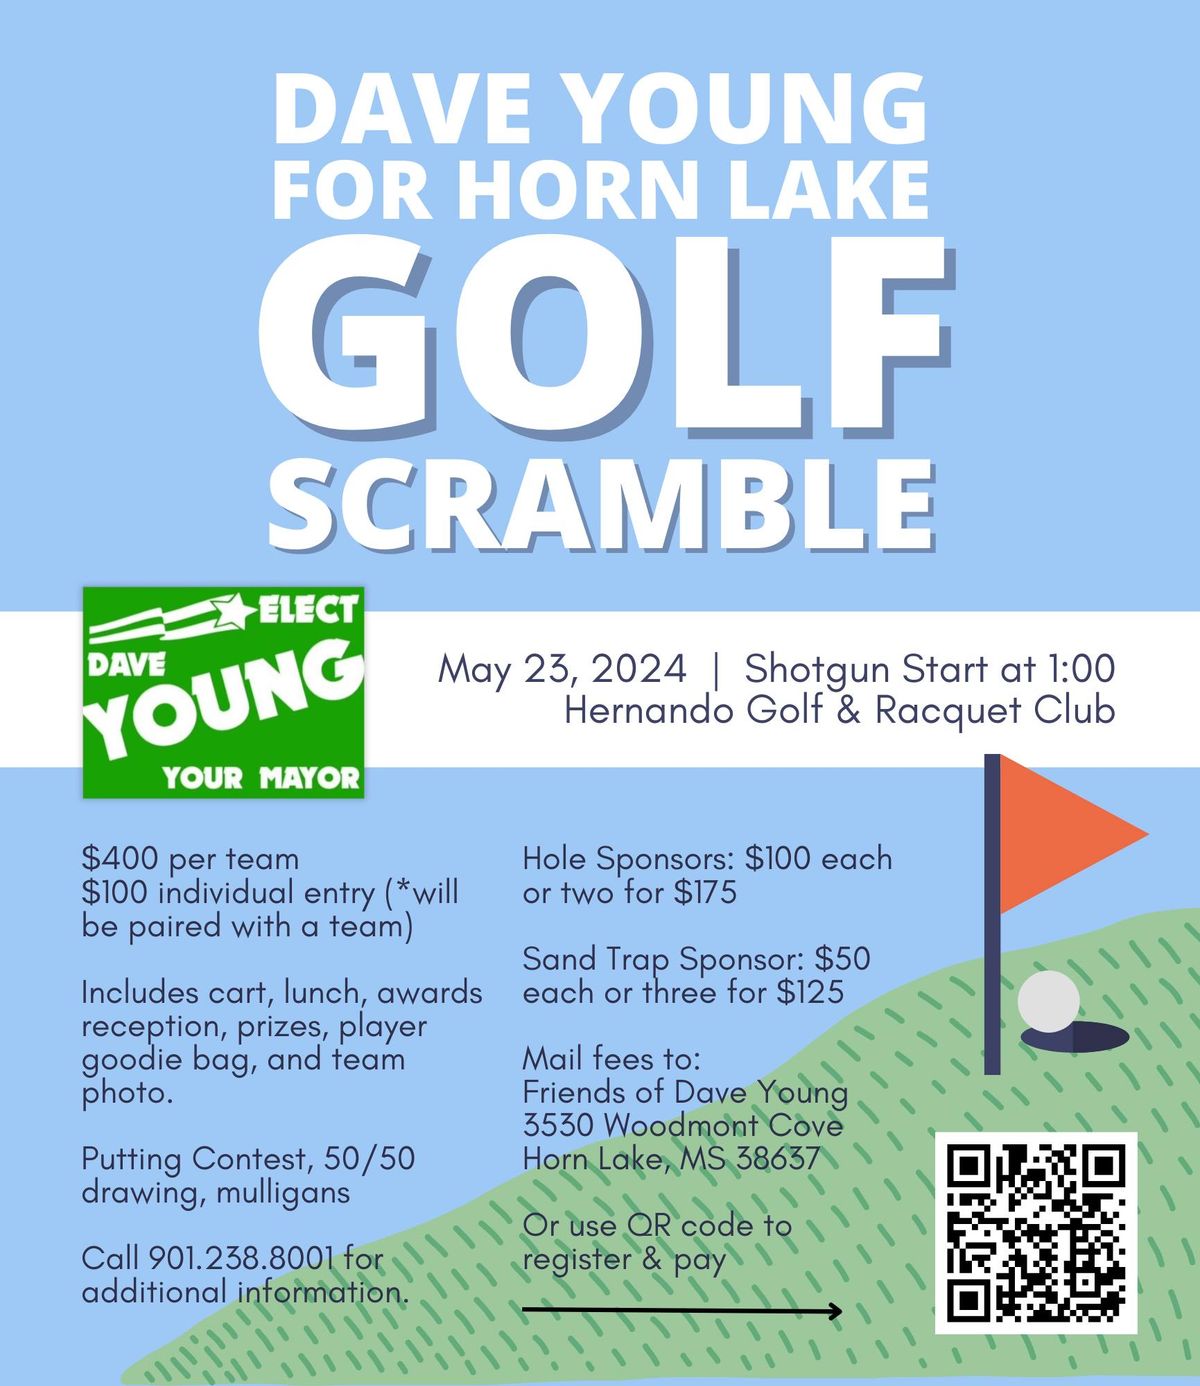 Dave Young for Horn Lake Golf Tournament